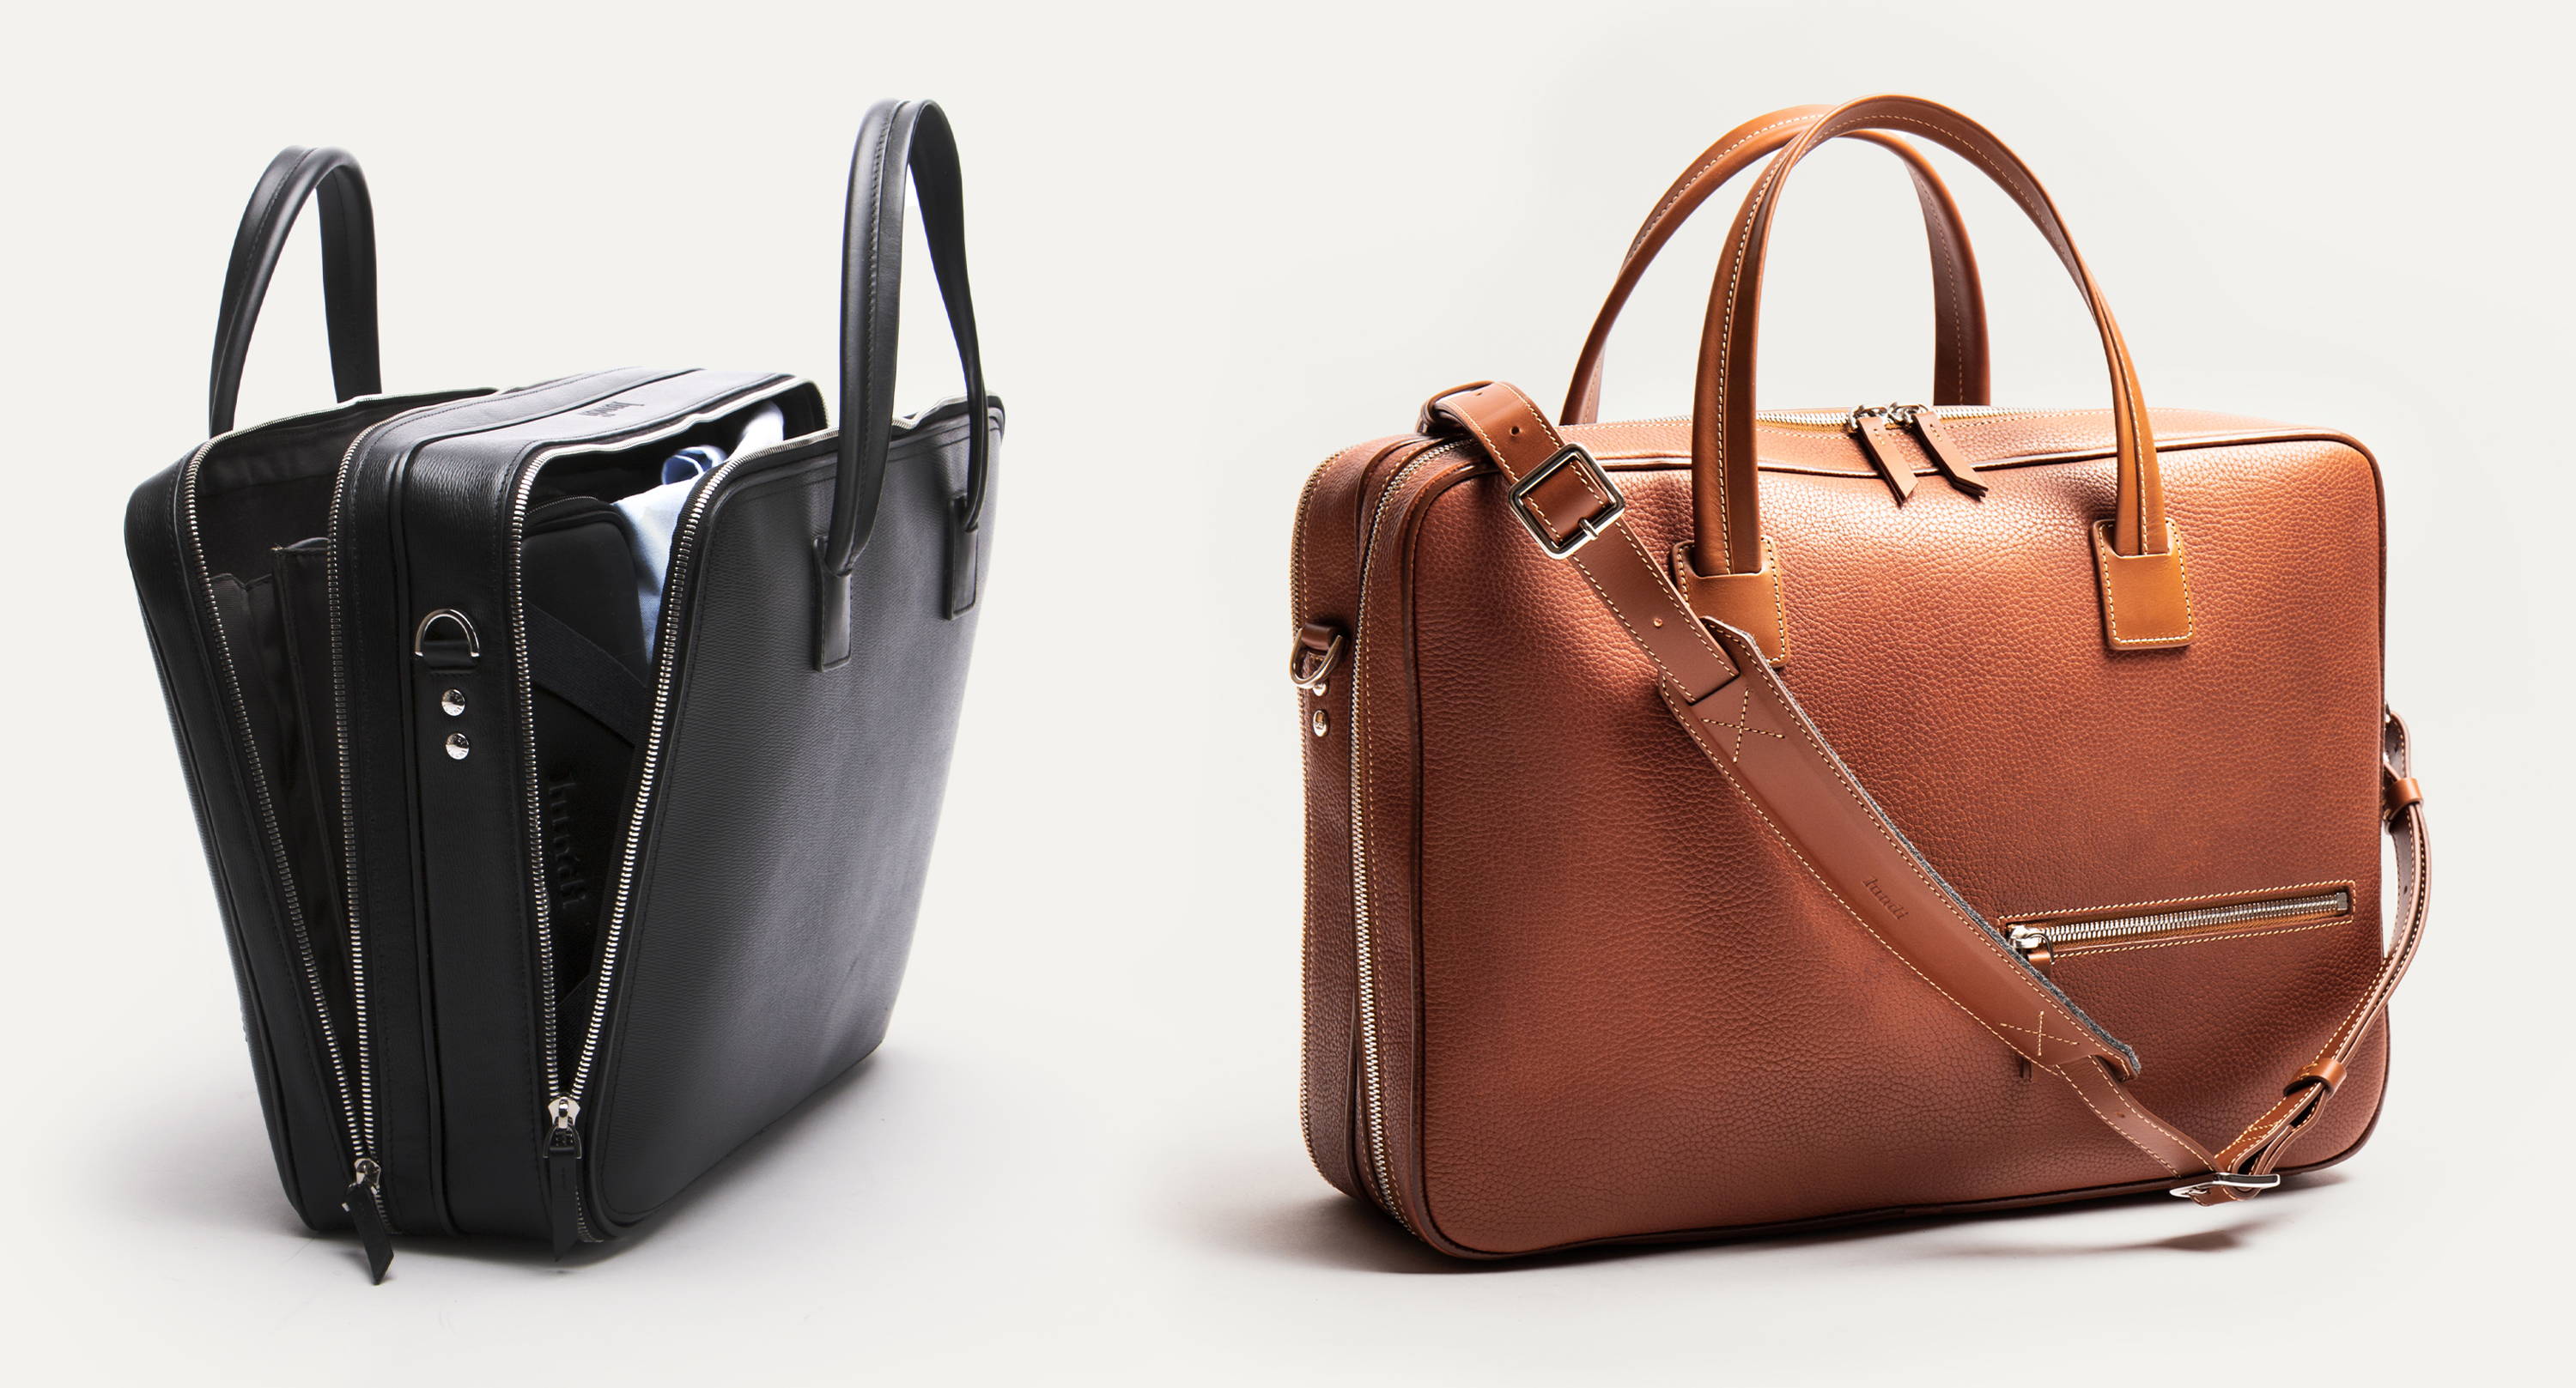 What 36-hour bag is made for you? — lundi